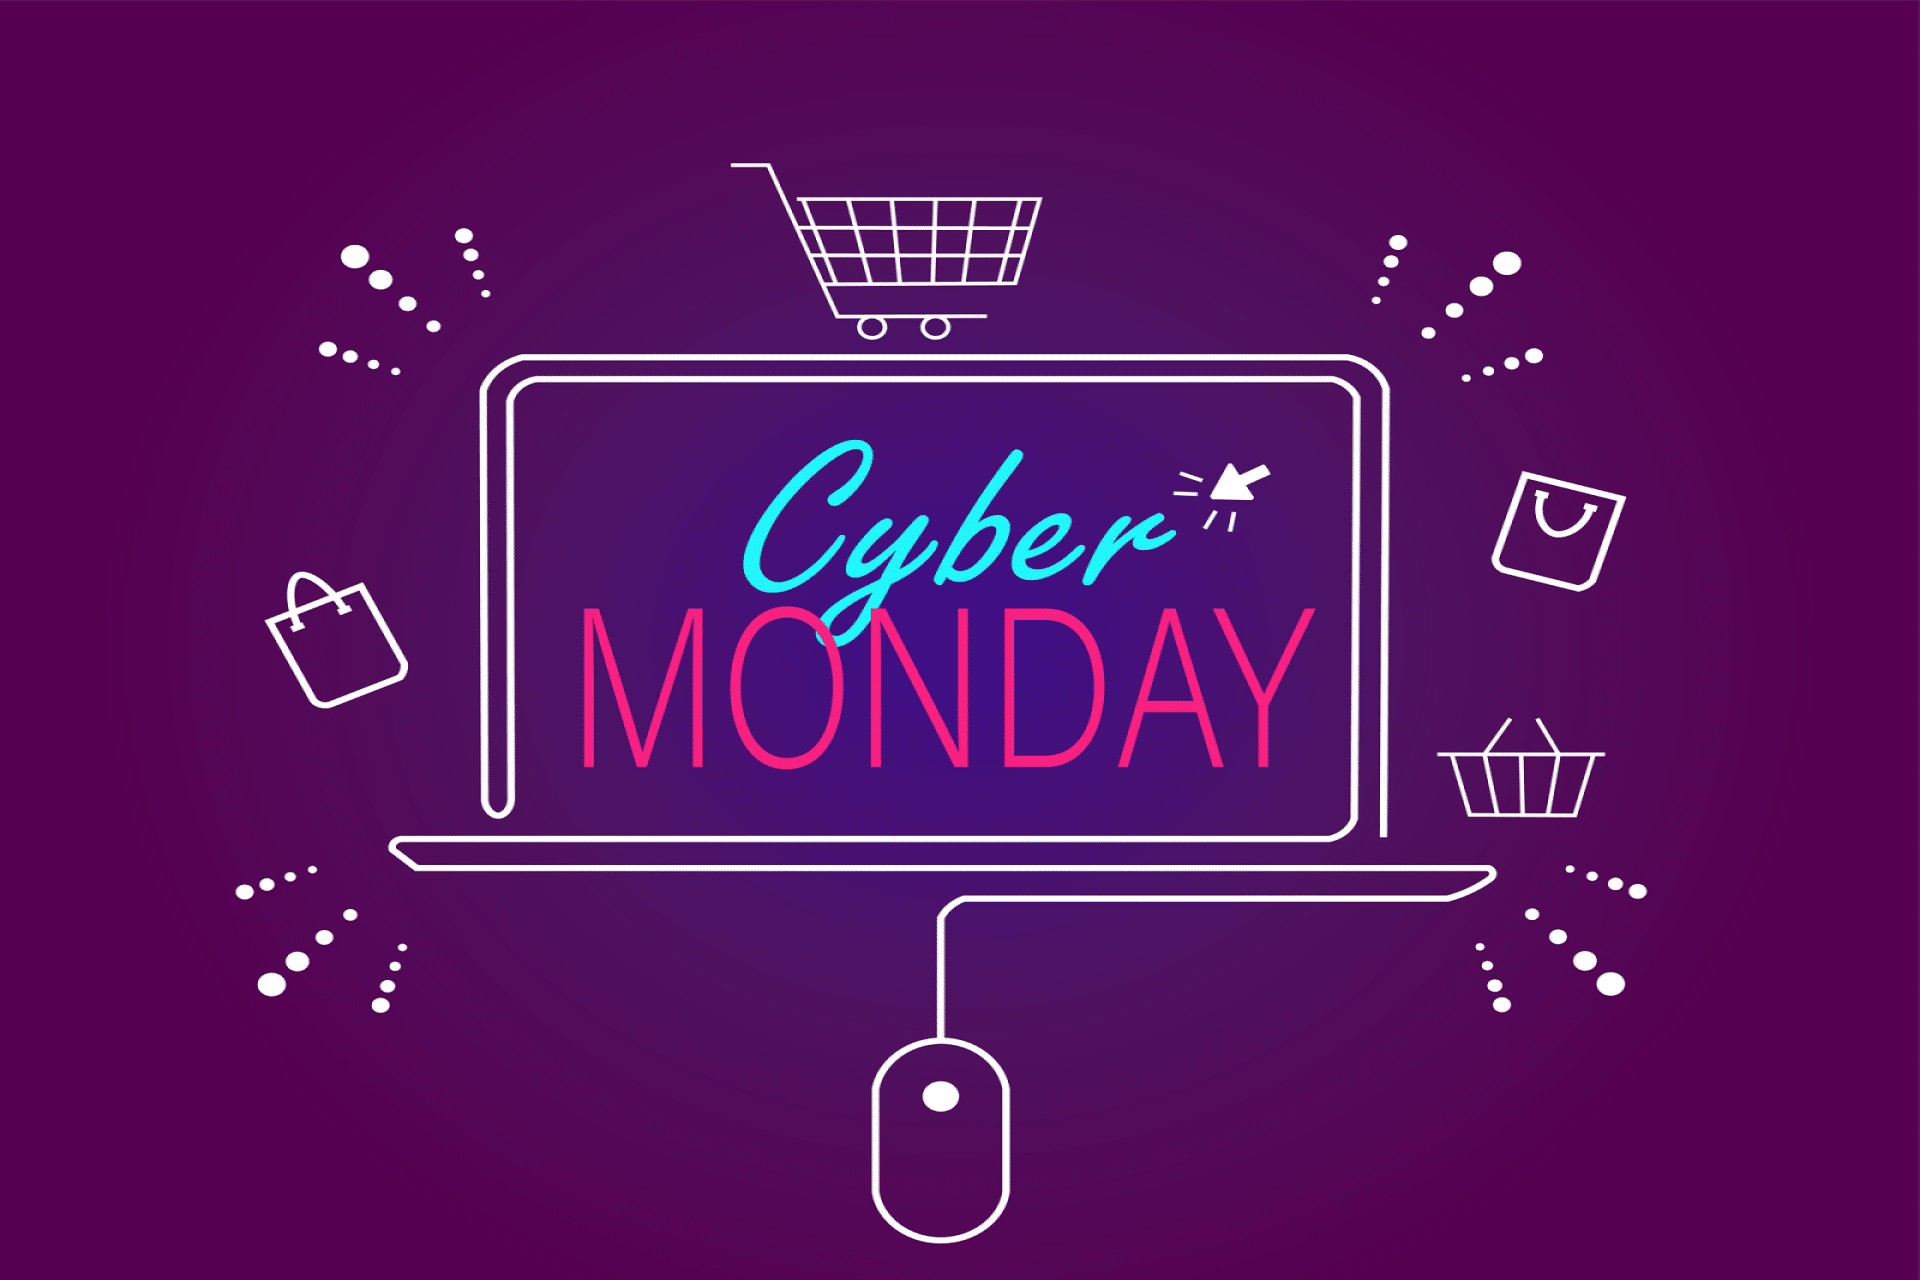 Cyber Monday shopping tips BestCards.com